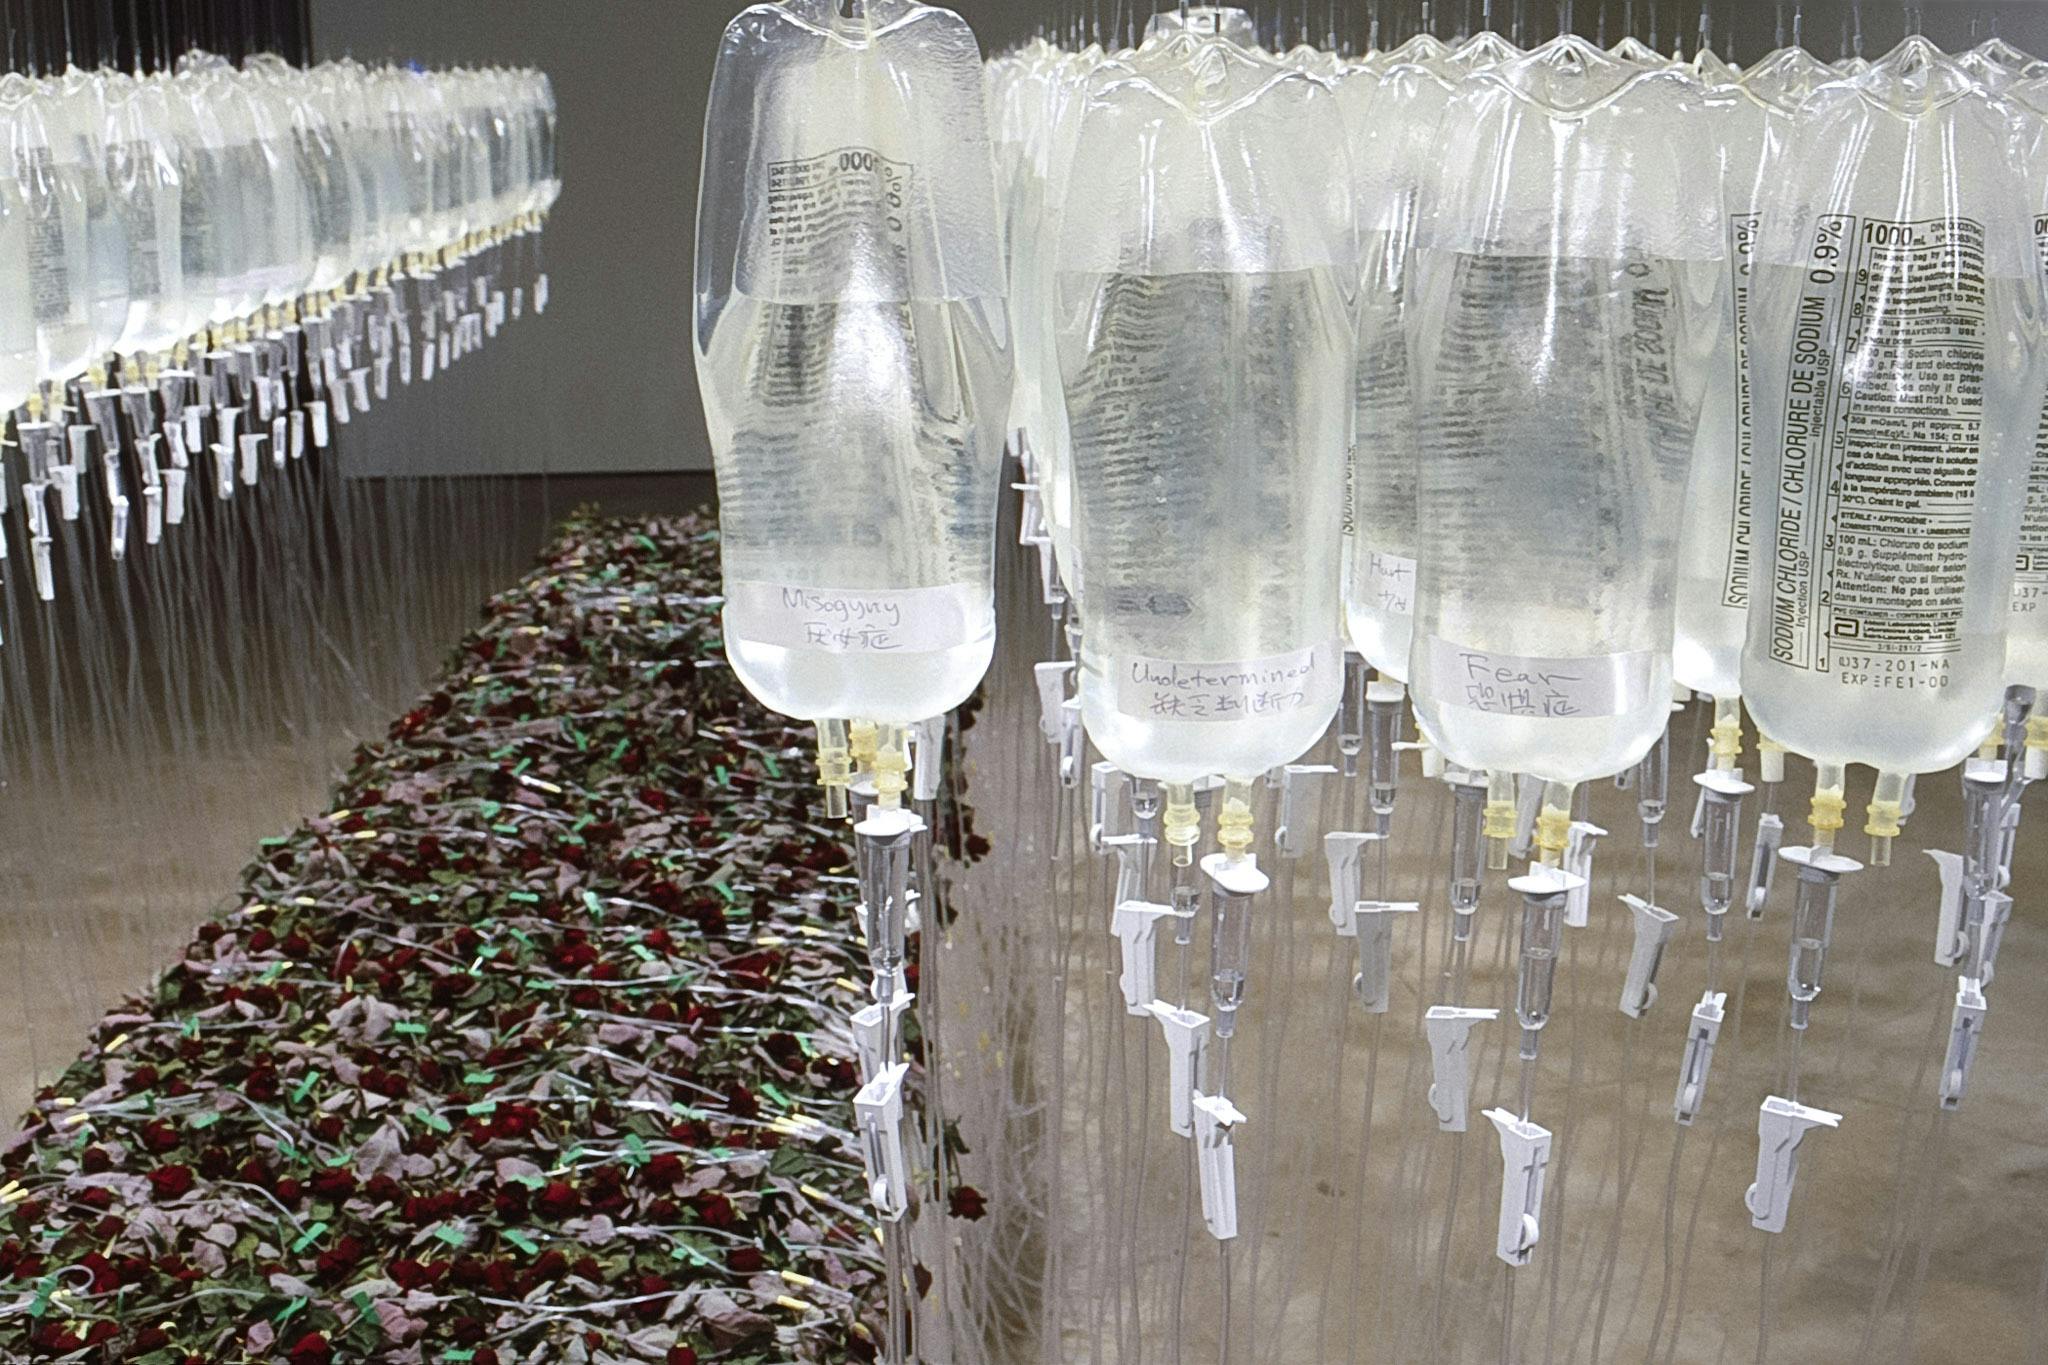 An aerial view of the installation shows the close-up of the infusion bags filled with translucent liquid. The bags are hung from the gallery ceiling and connected to the red roses via tubes. 